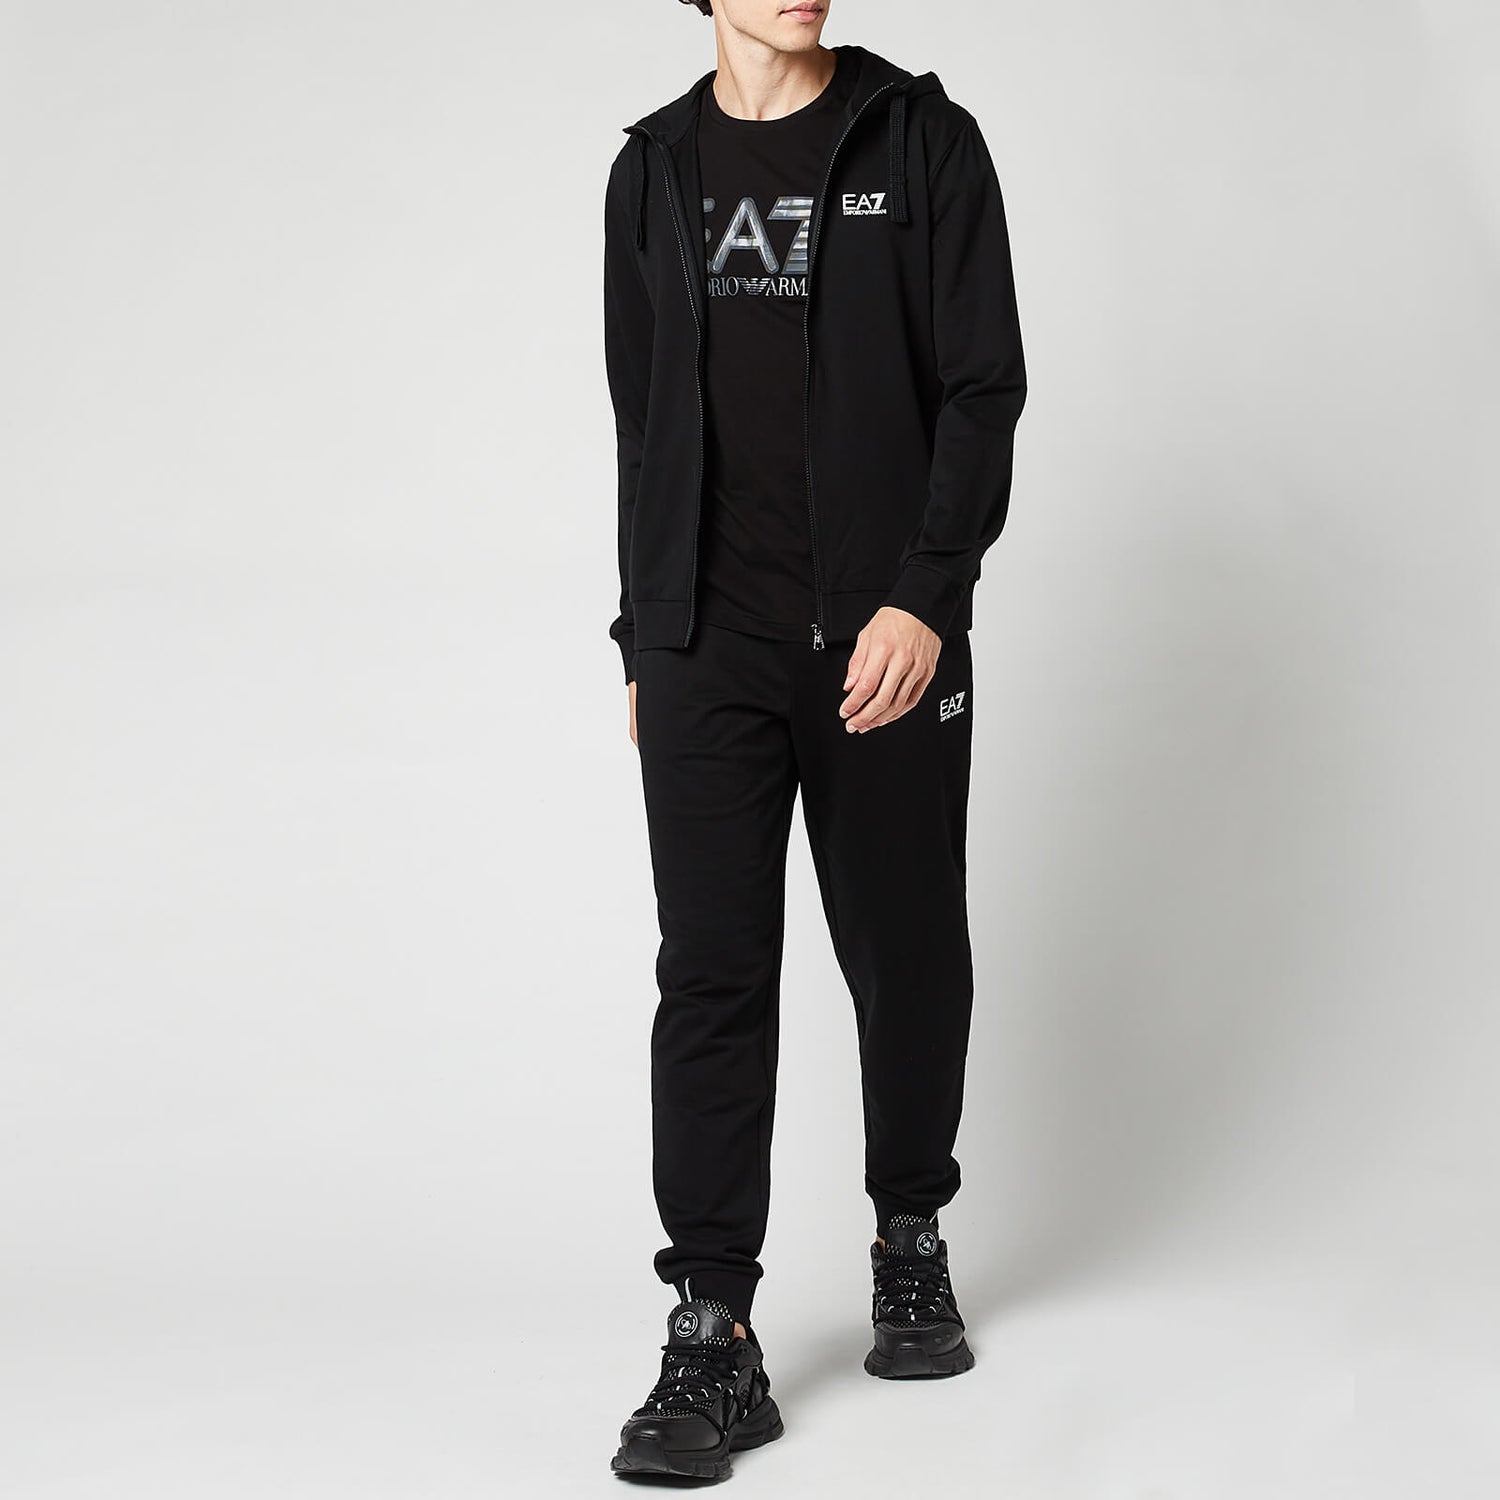 EA7 Men's Core Identity French Terry Hooded Tracksuit - Black - M